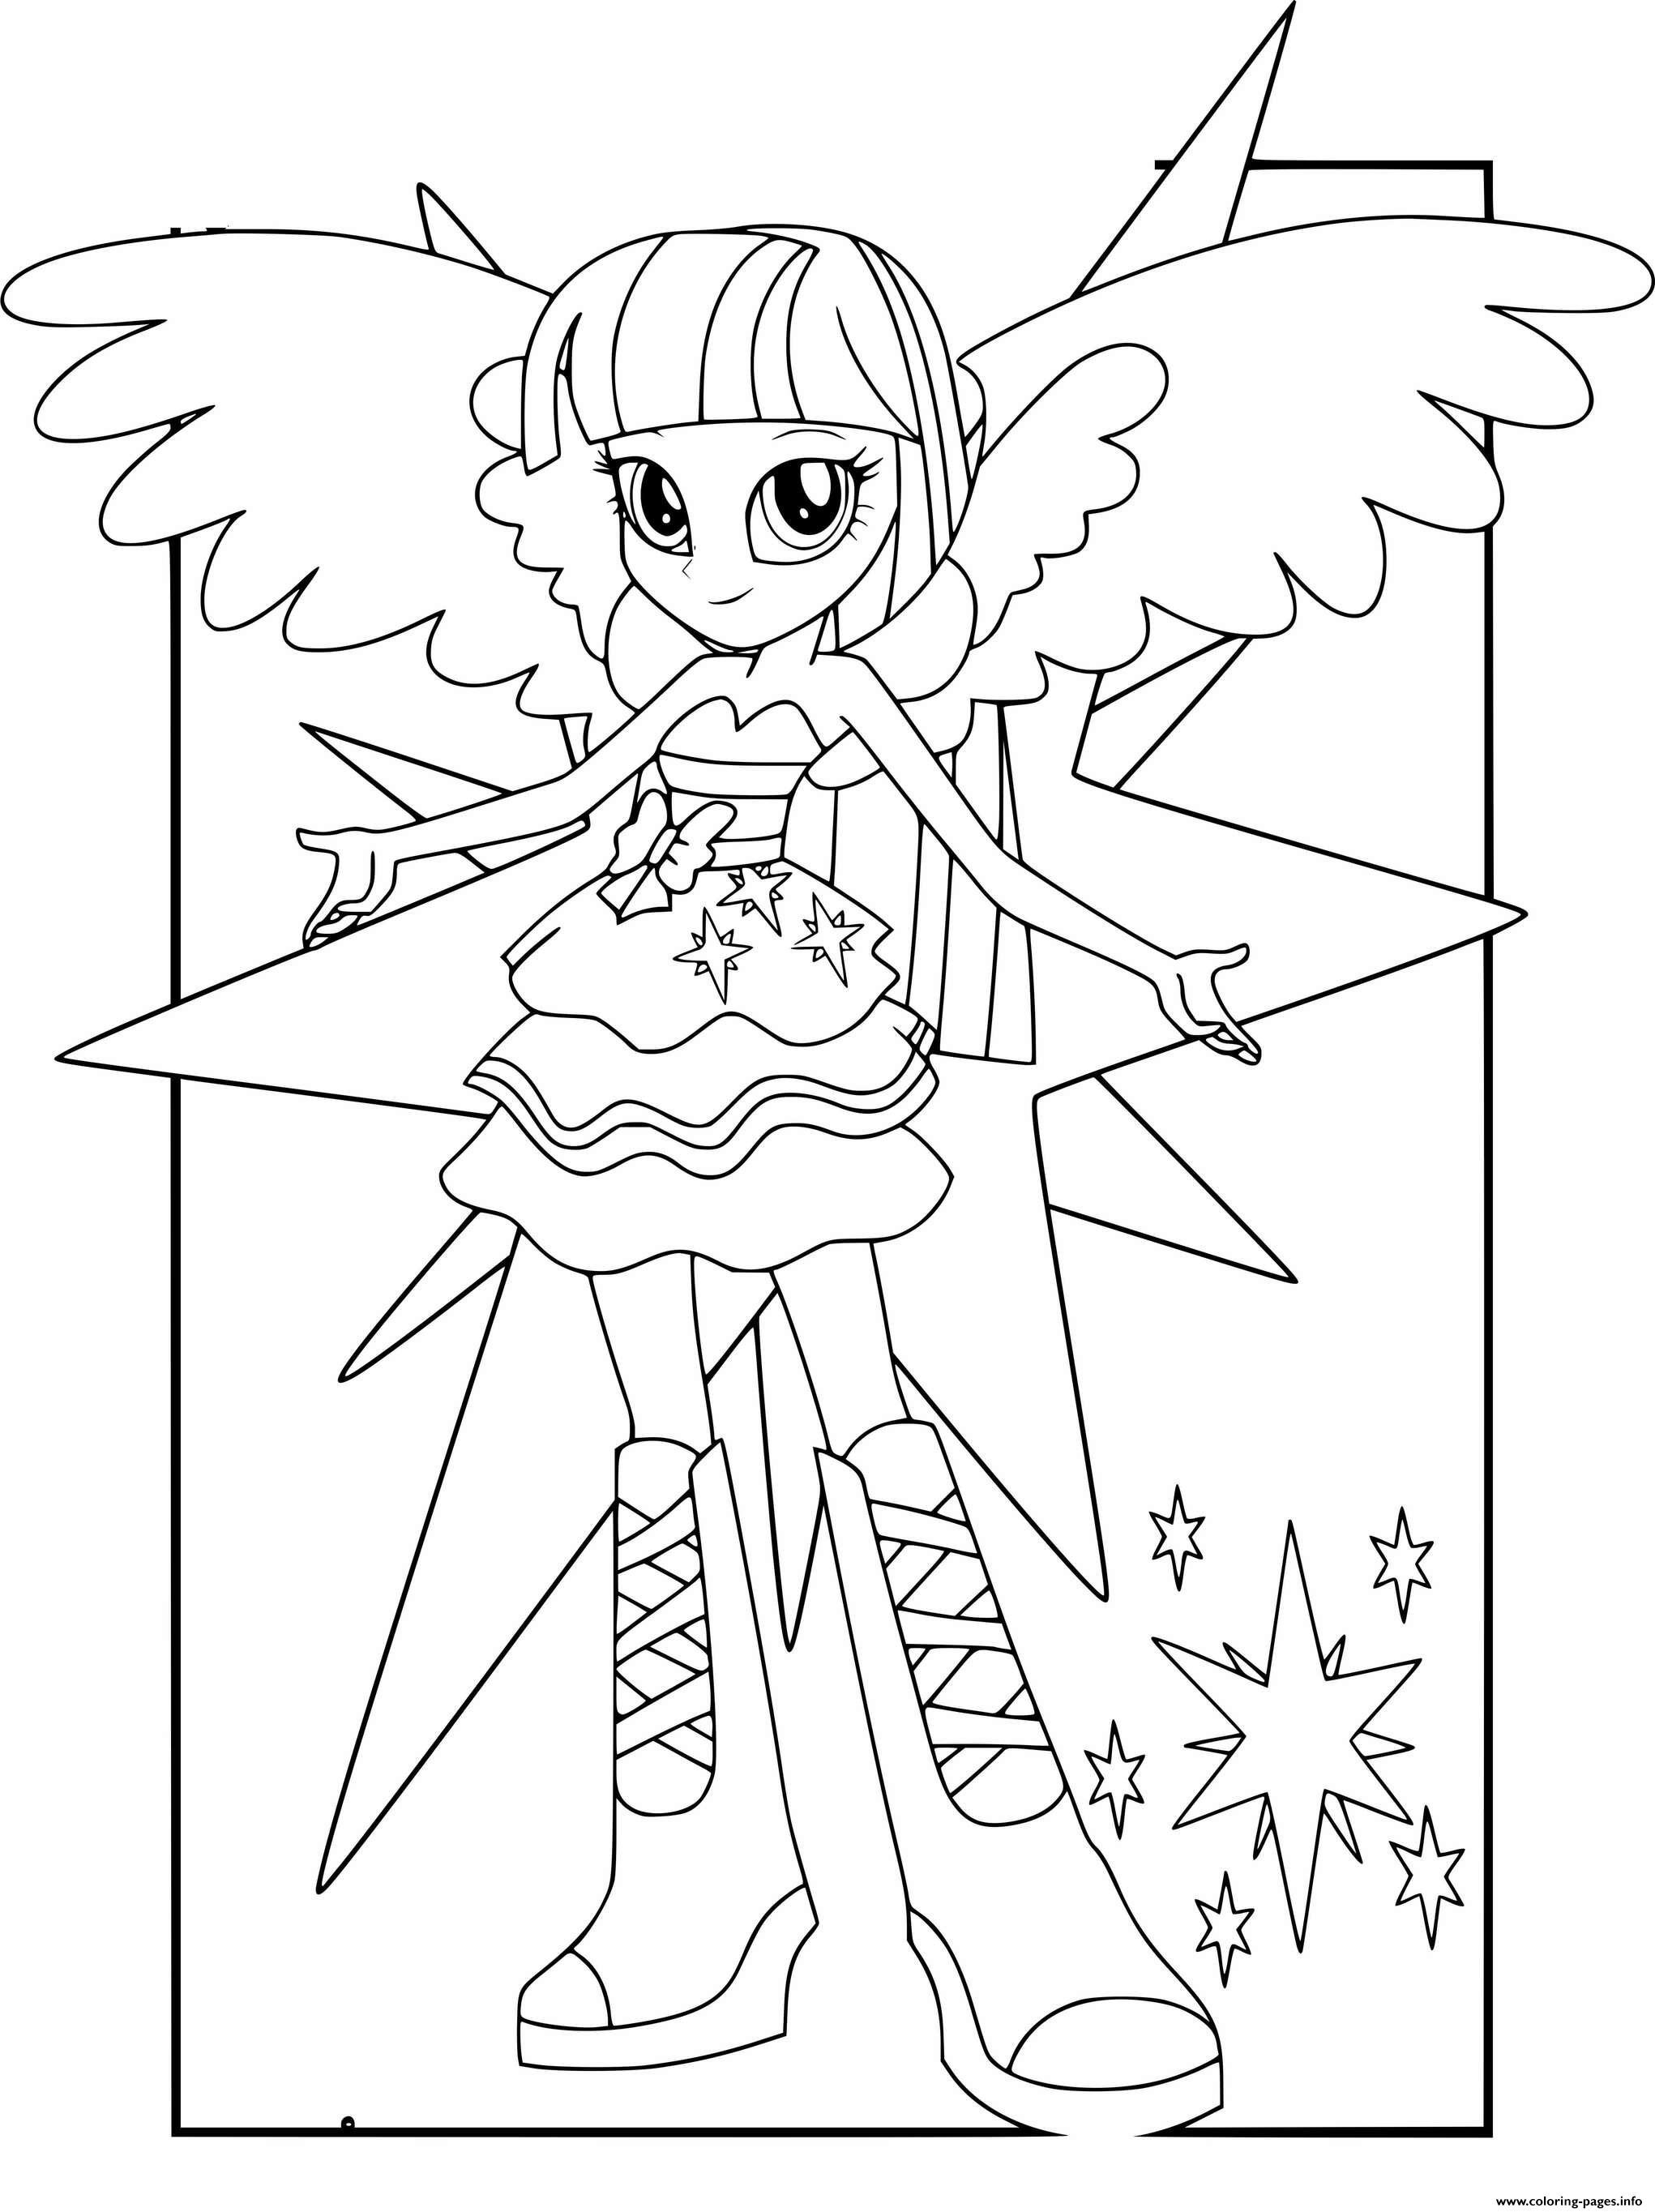 MLP Equestria Girls Twilight Sparkle Coloring page Printable